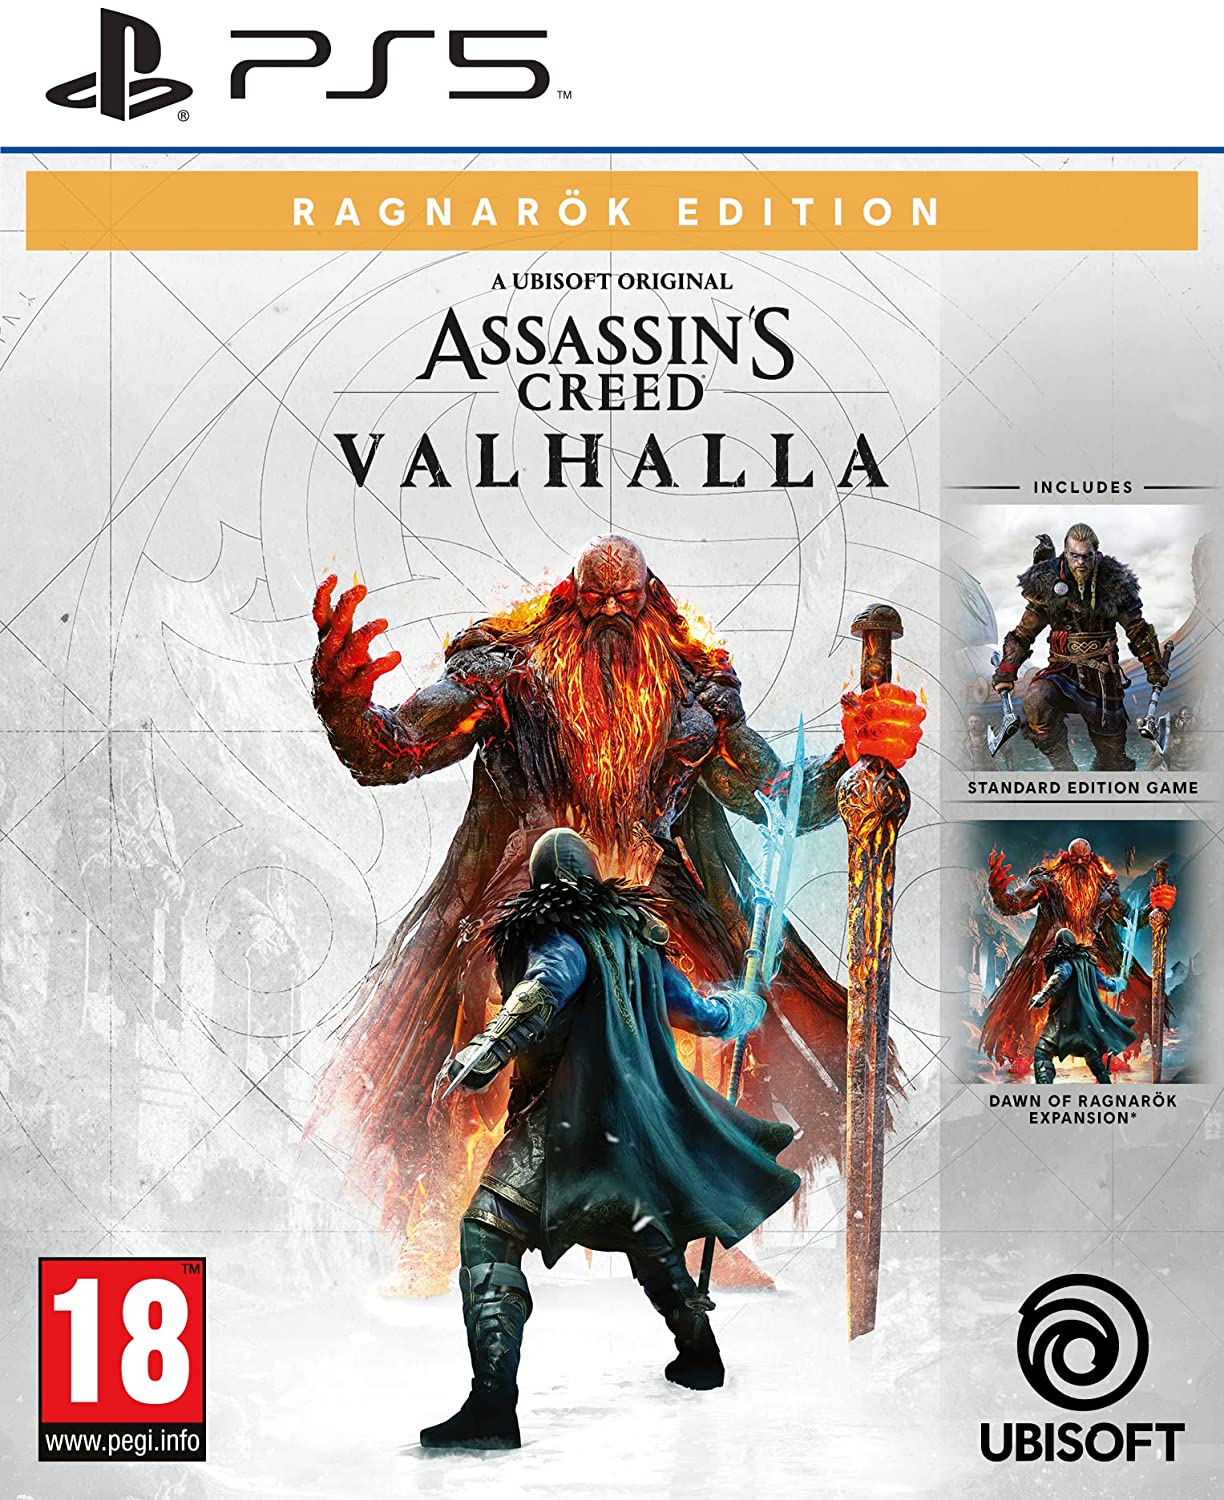 Assassin's Creed Valhalla Arabic And English PS5